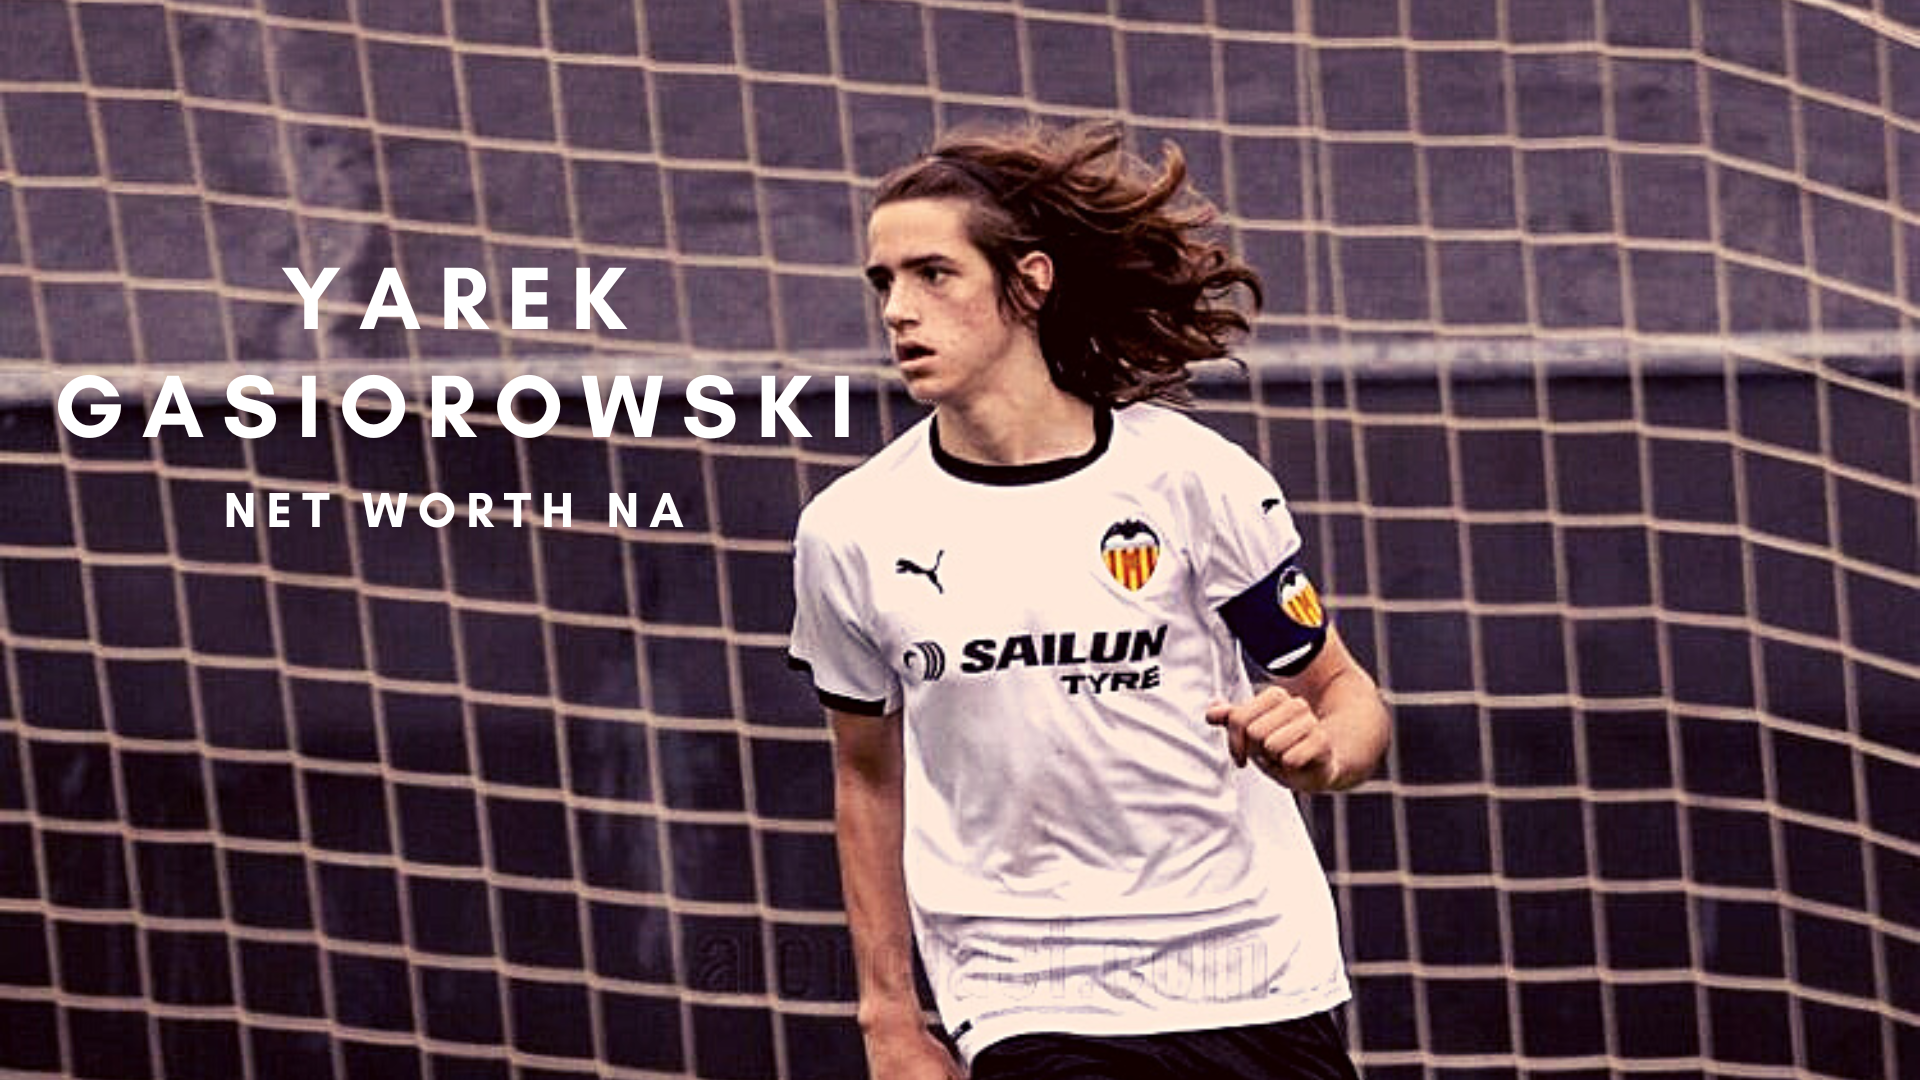 Yarek Gasiorowski Hernandis is a Spanish professional footballer who plays as a centre-back for the Valencia Mestalla. (Credit: Grada3)